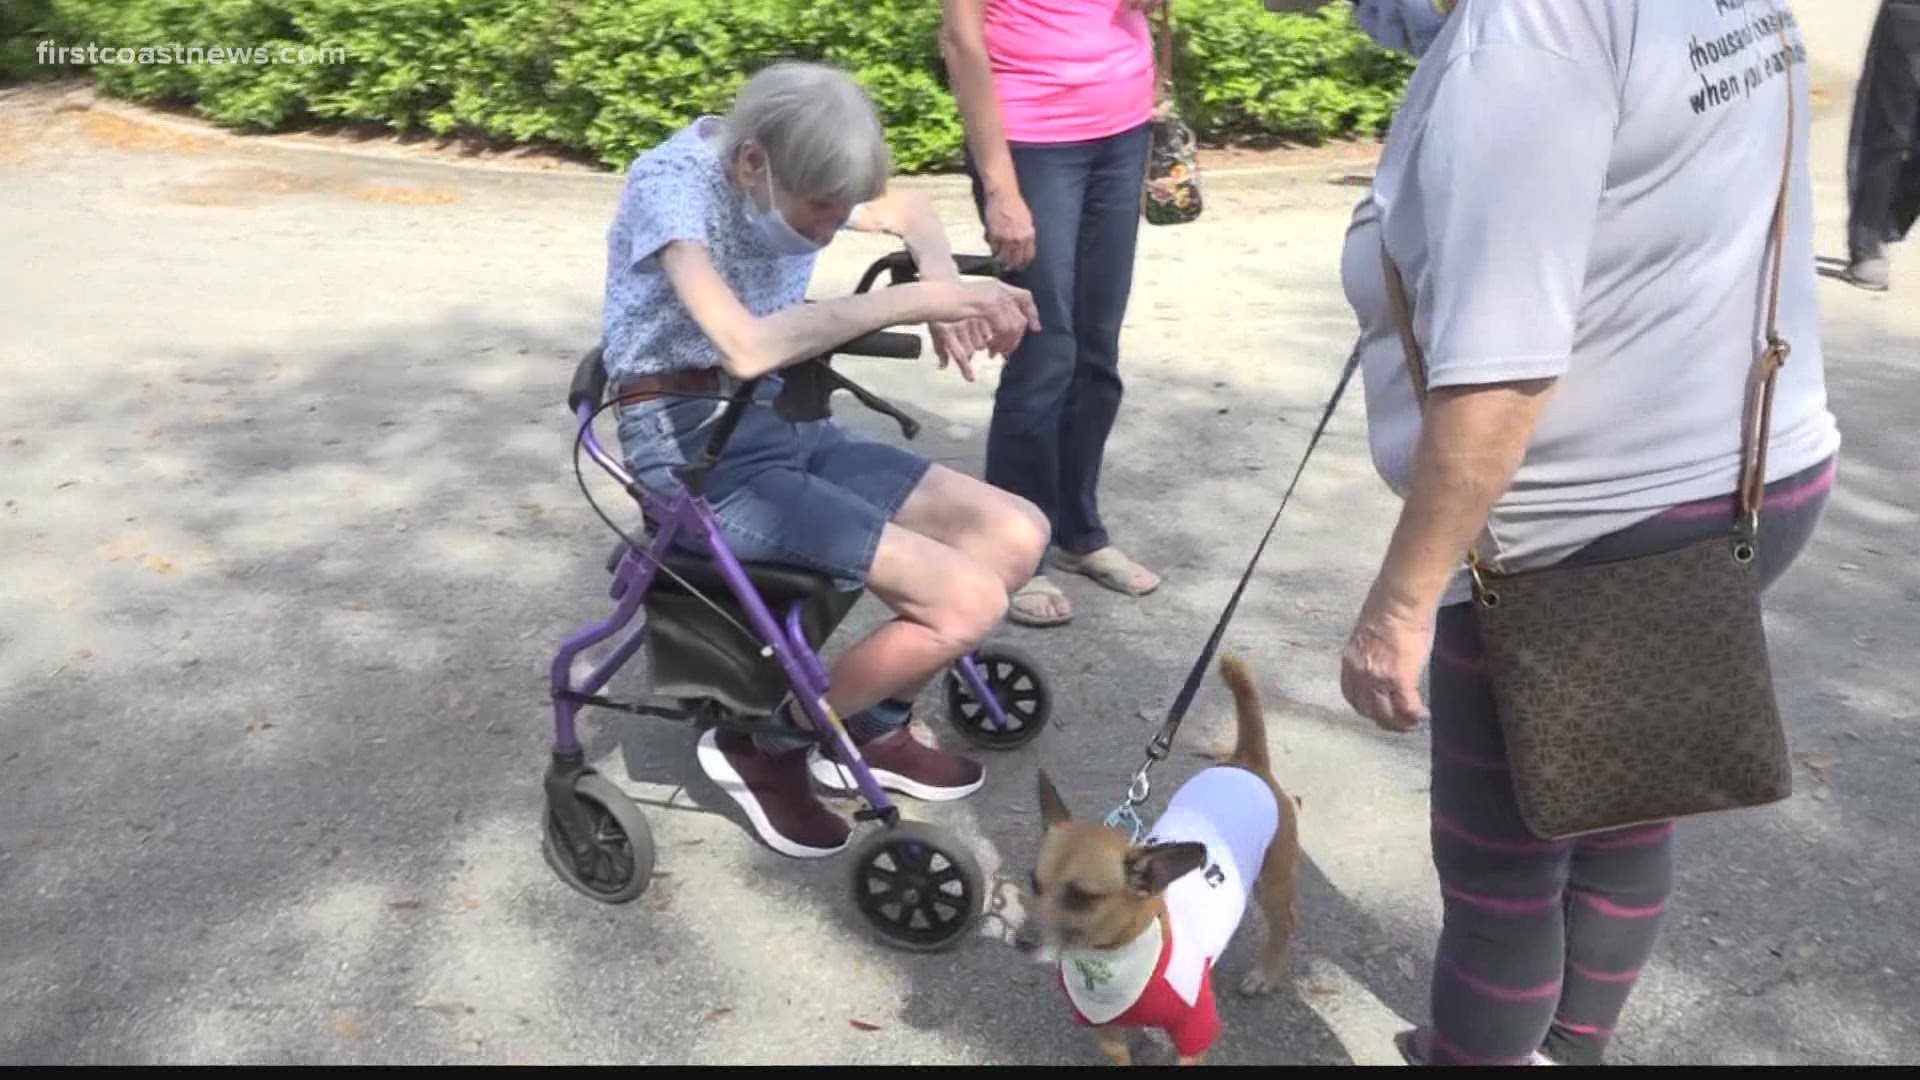 'It means a whole lot to them': Residents at Fernandina Beach assisted living facility make new furry friends at pet adoption event